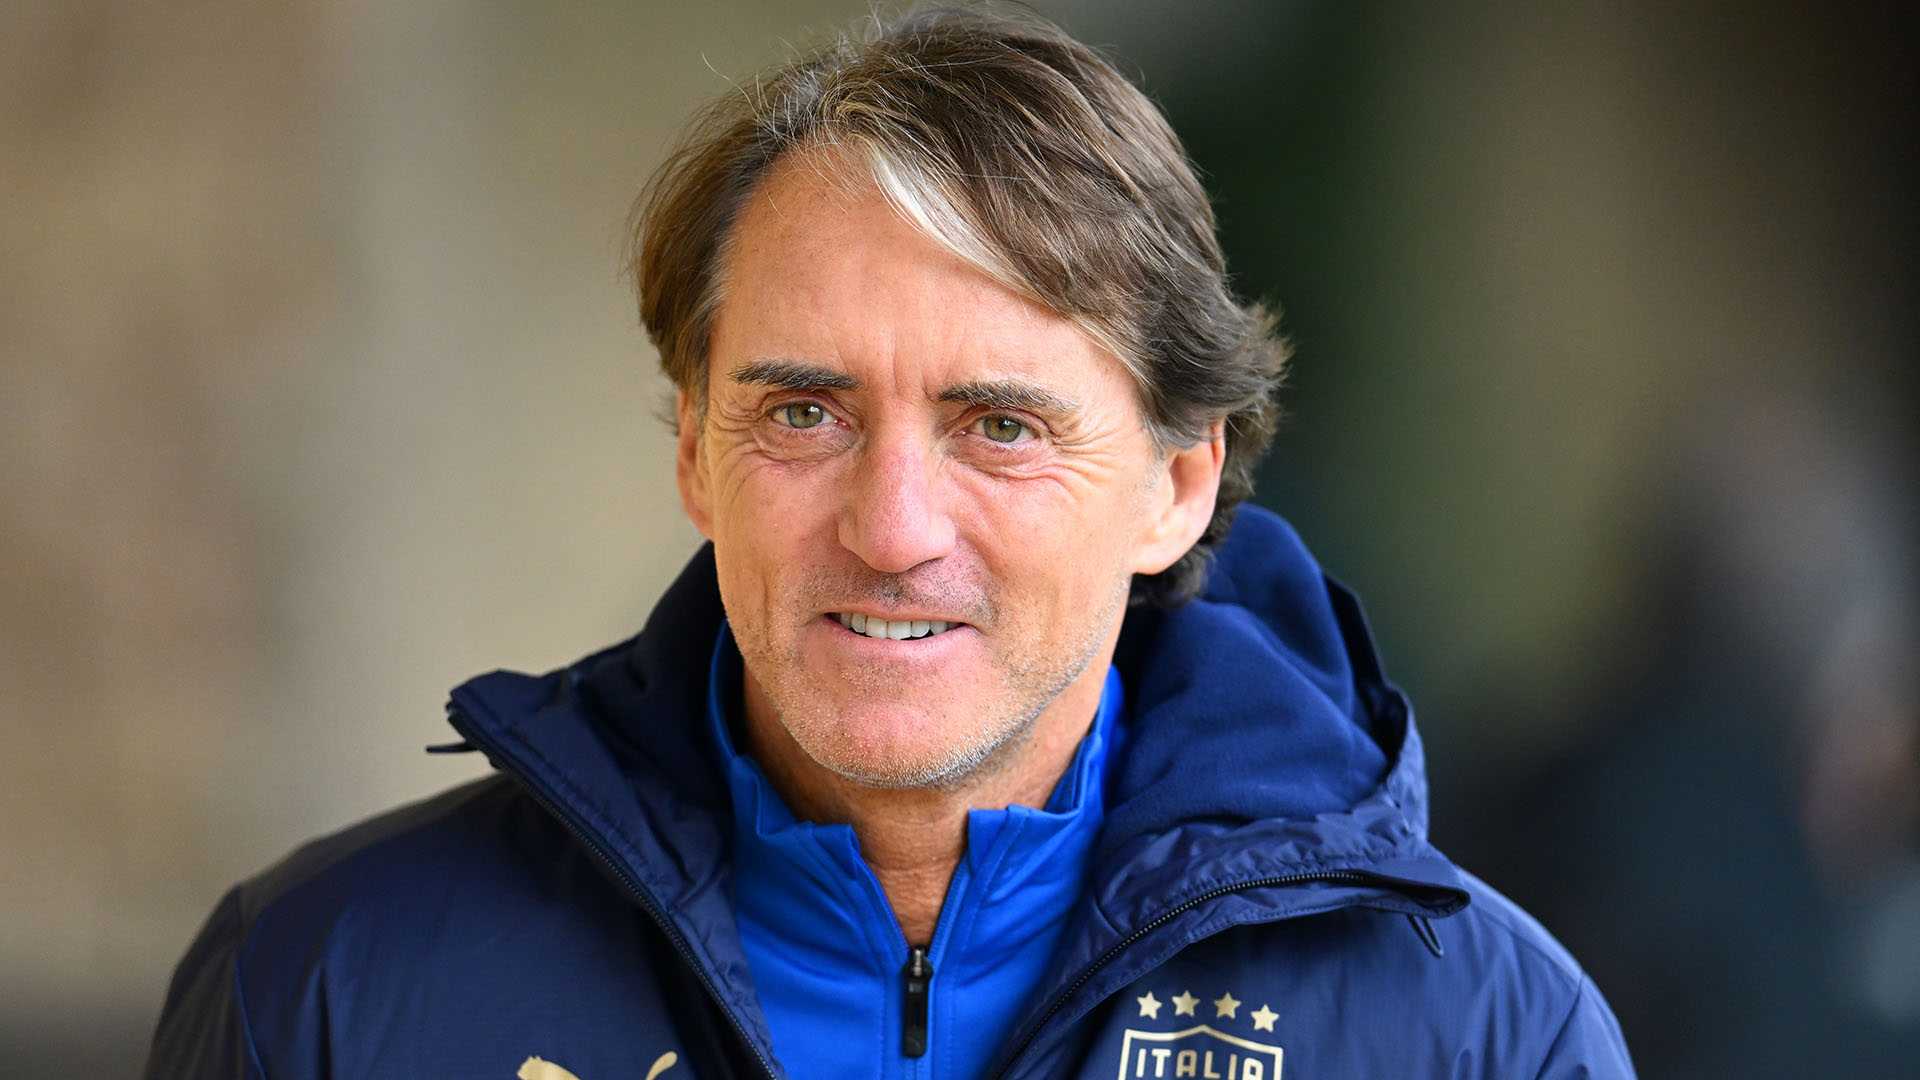 Roberto Mancini has announced a 33-man team for the upcoming World Cup playoffs. As expected, the Azzurri coach picked Joao Pedro over Mario Balotelli.